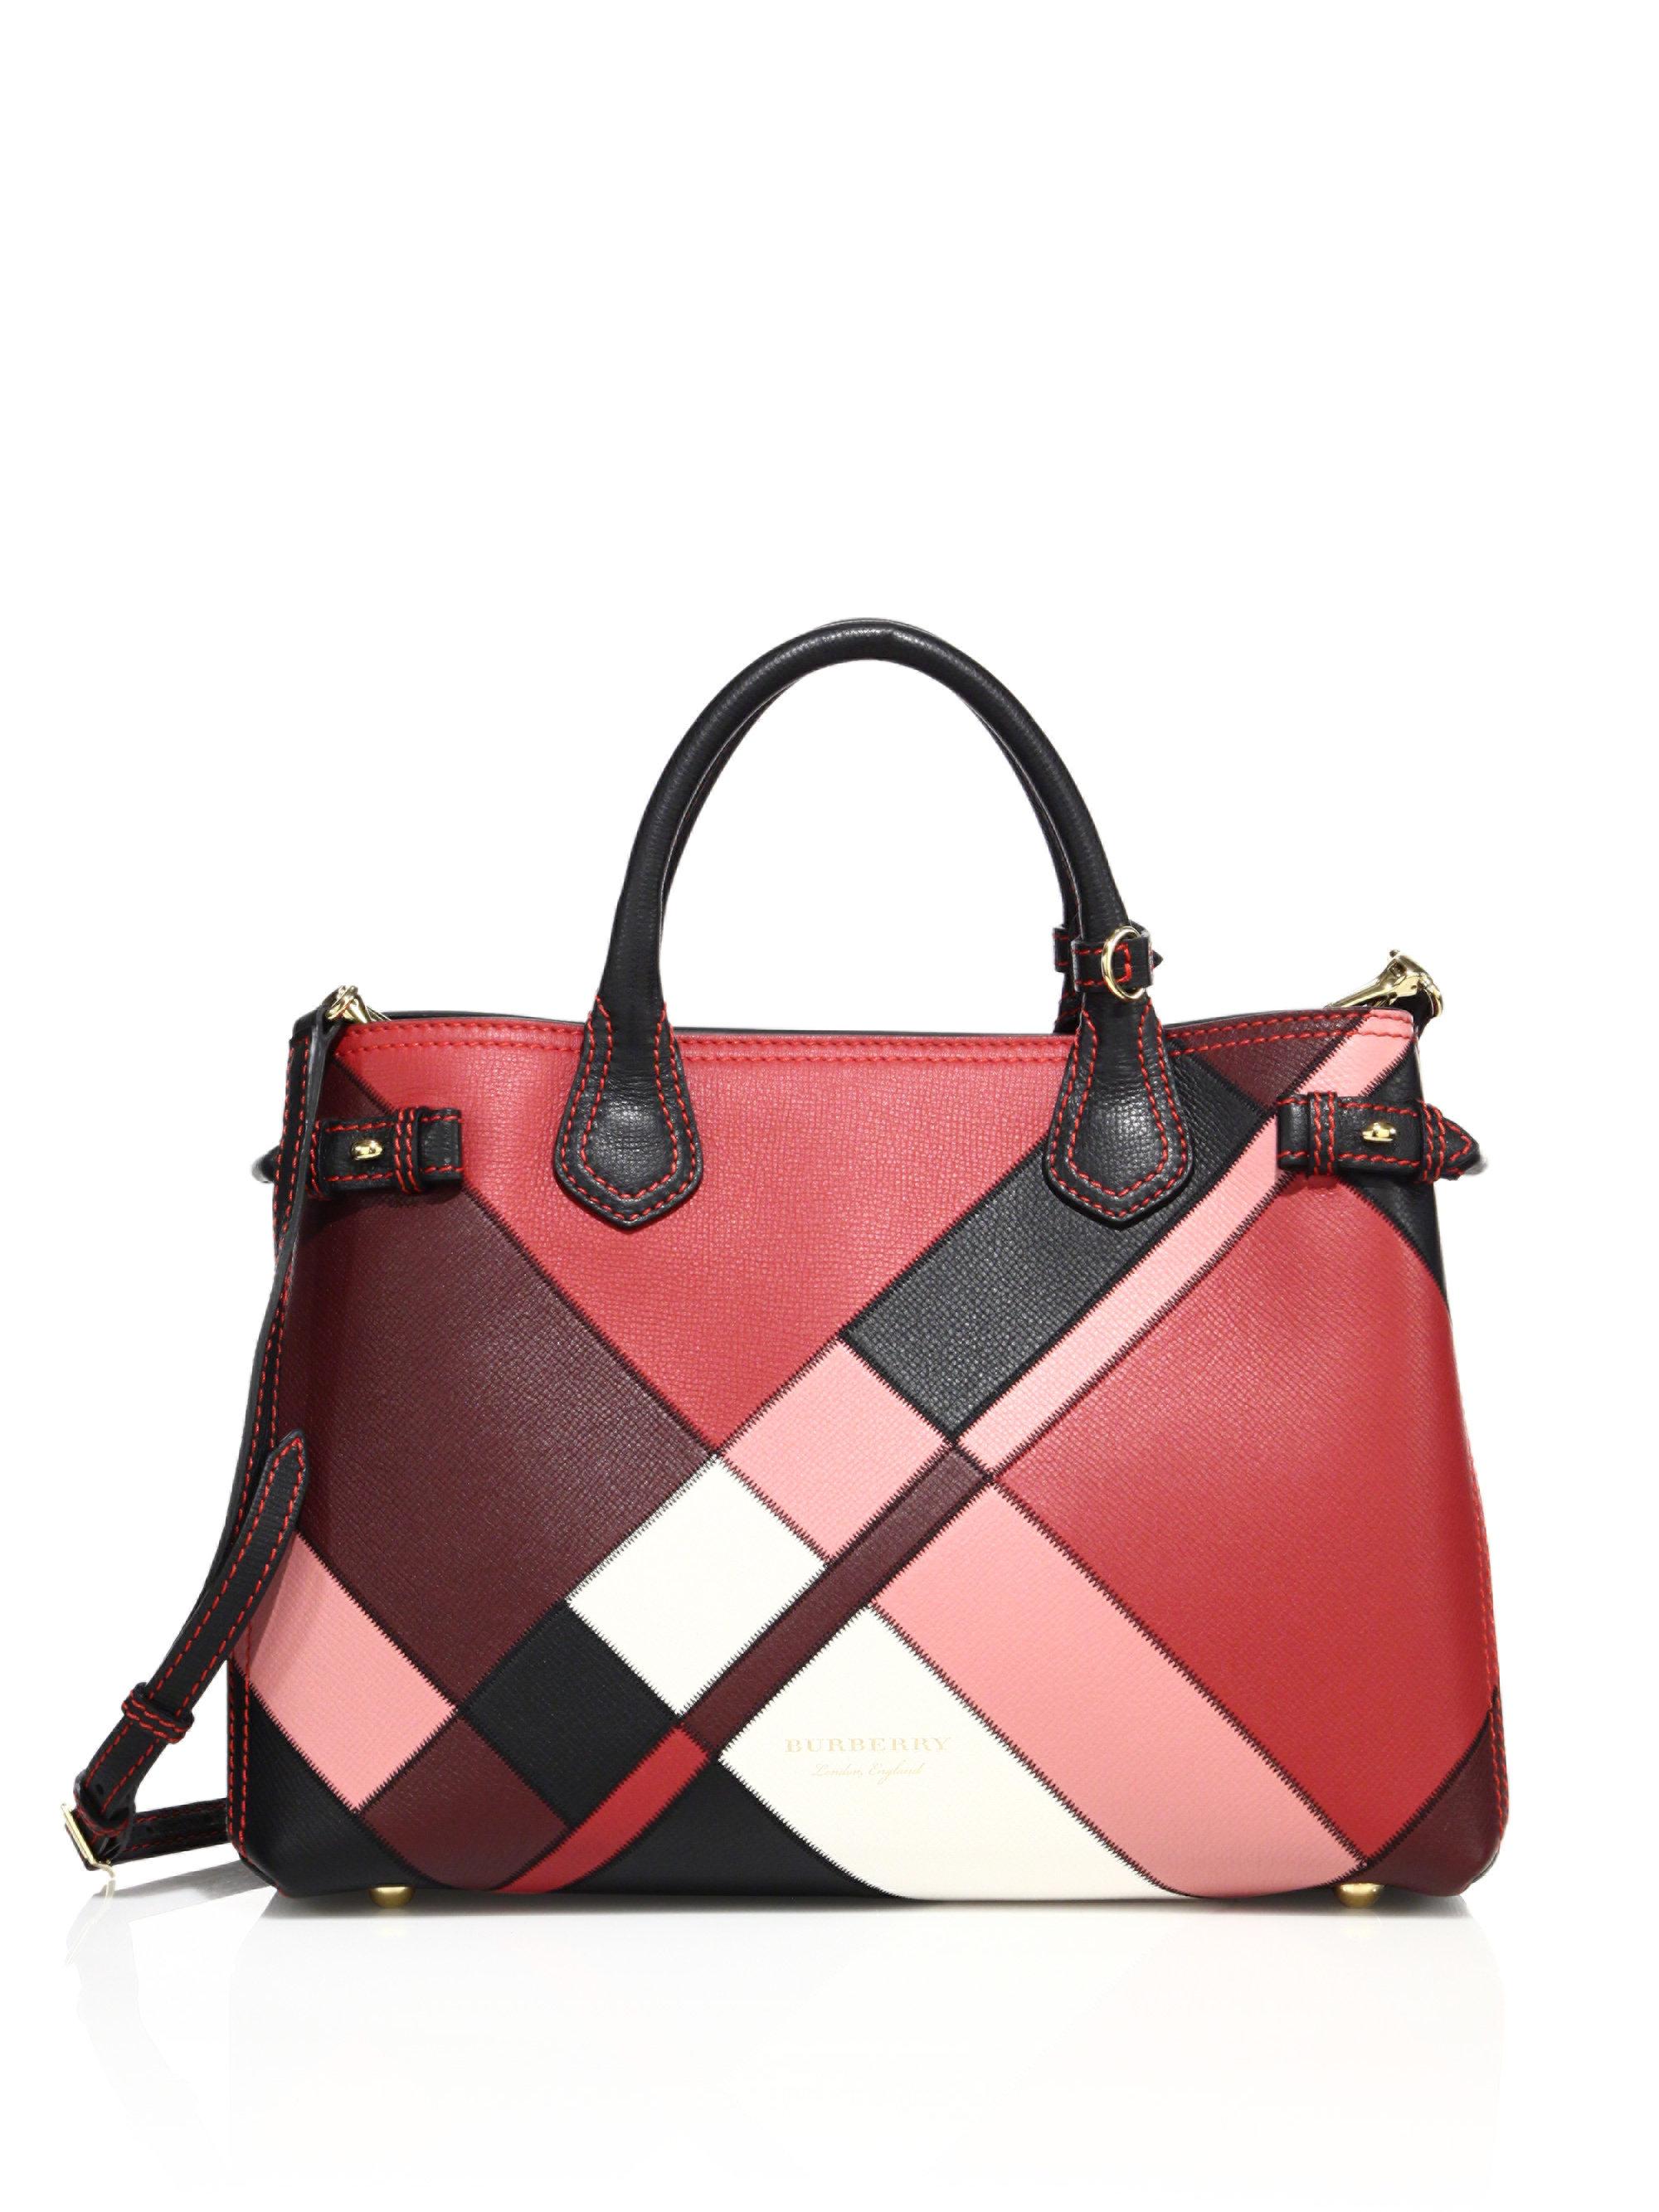 Burberry Banner Medium Patchwork Leather & House Check Satchel in Pink ...